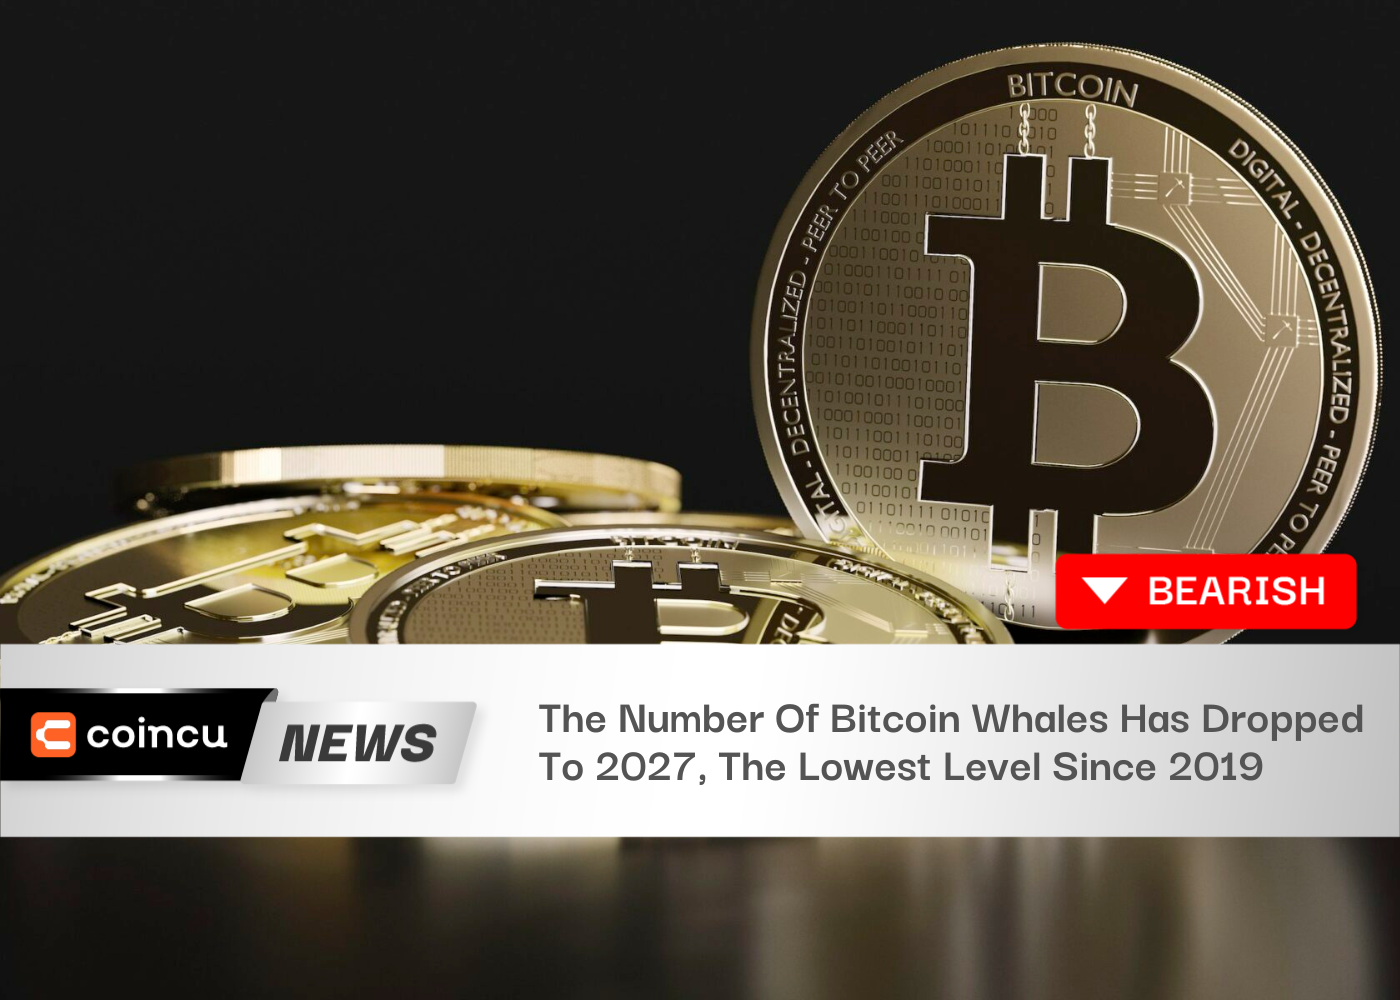 The Number Of Bitcoin Whales Has Dropped To 2027, The Lowest Level Since 2019